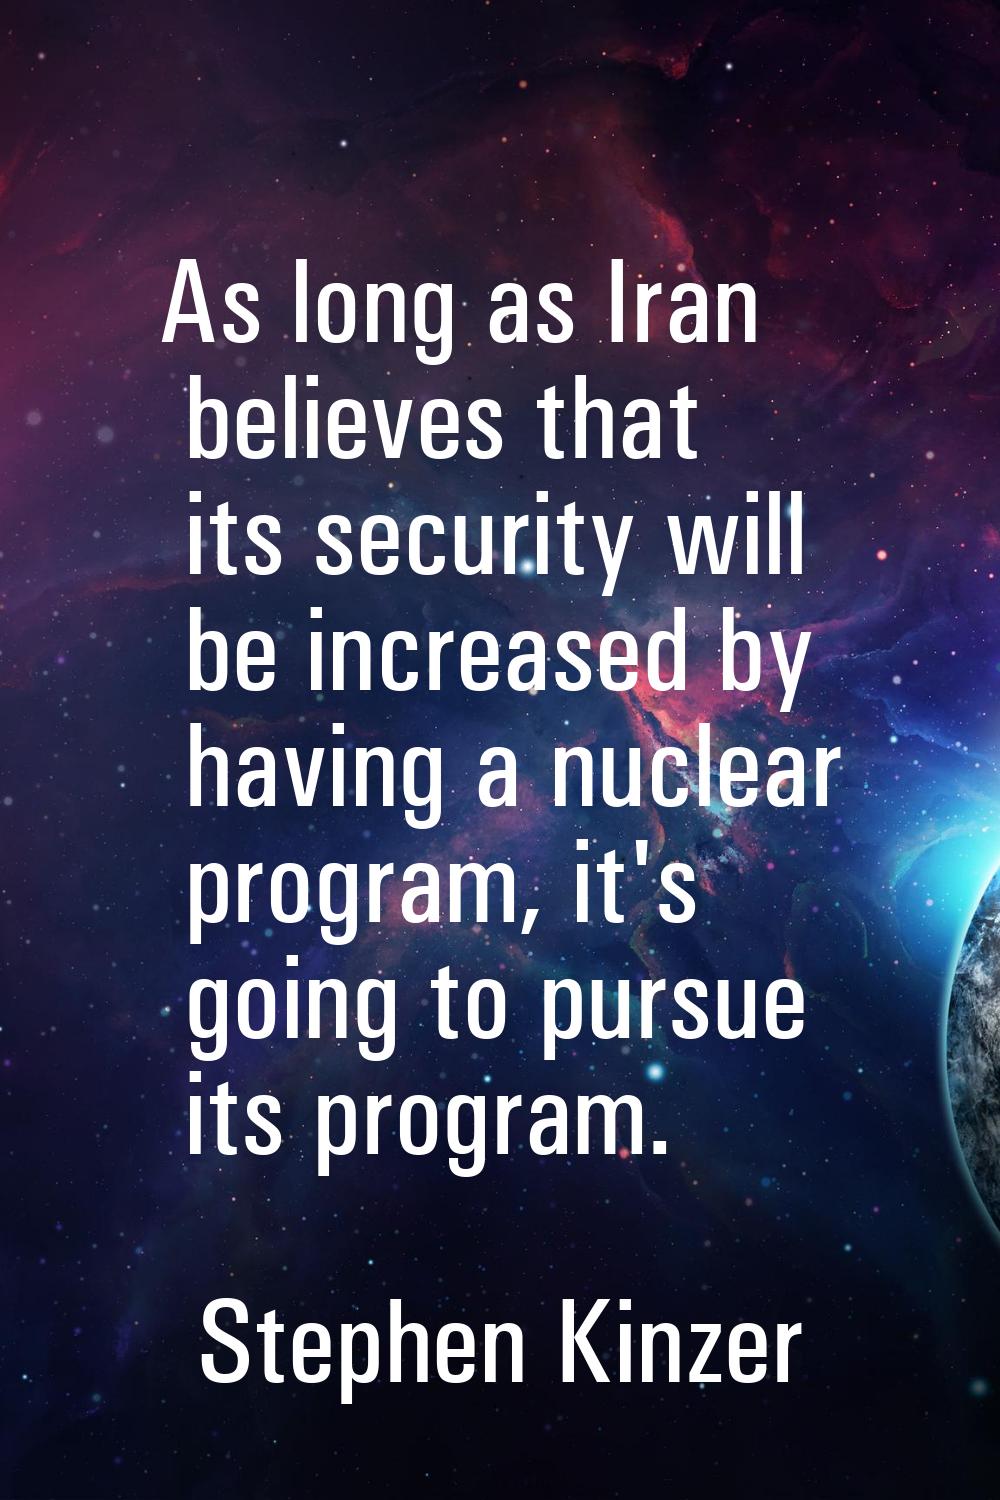 As long as Iran believes that its security will be increased by having a nuclear program, it's goin